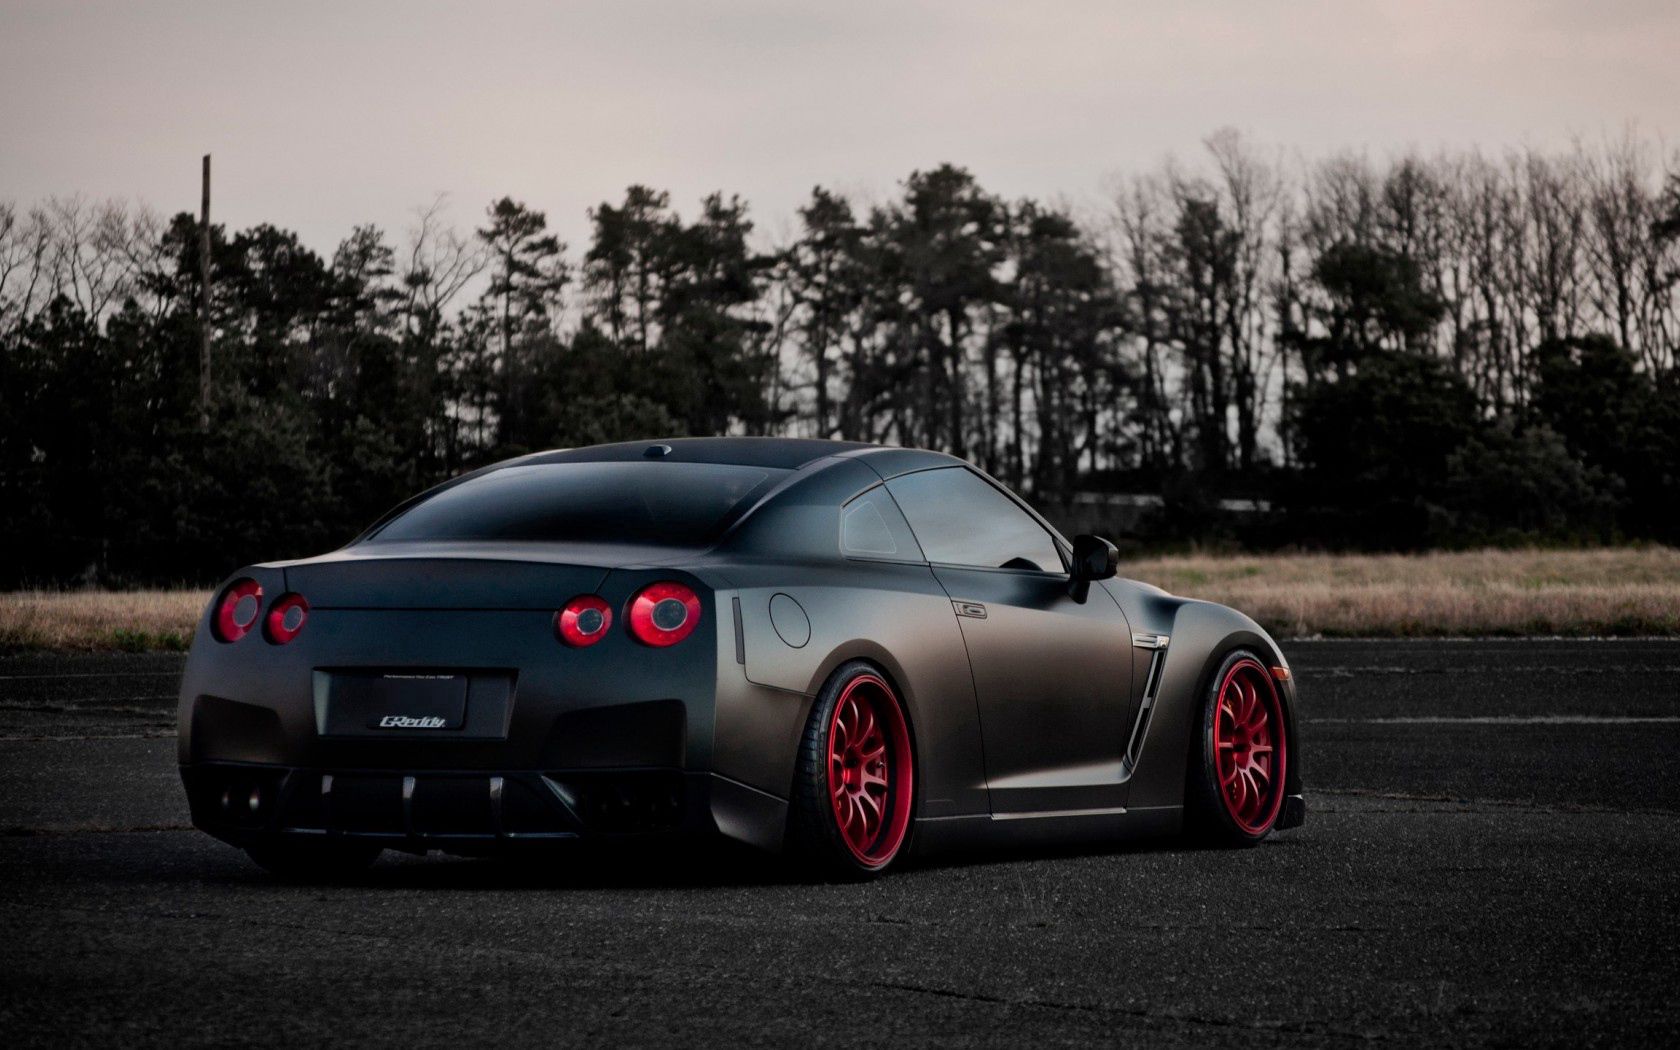 nissan, tuning, cars, back view, rear view, gt-r